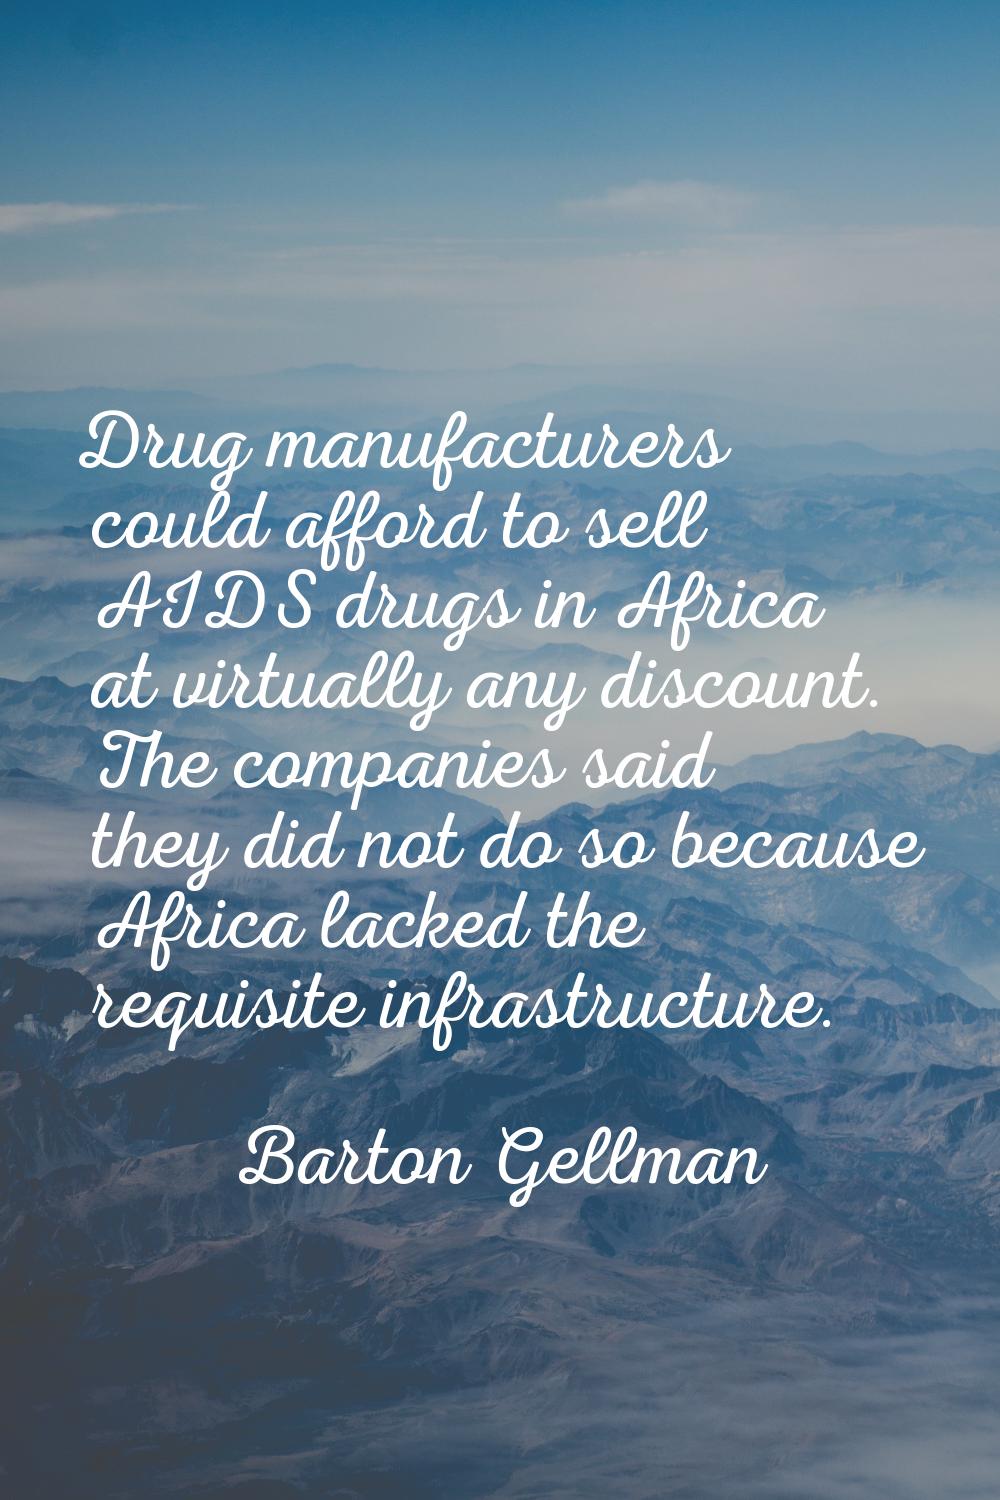 Drug manufacturers could afford to sell AIDS drugs in Africa at virtually any discount. The compani